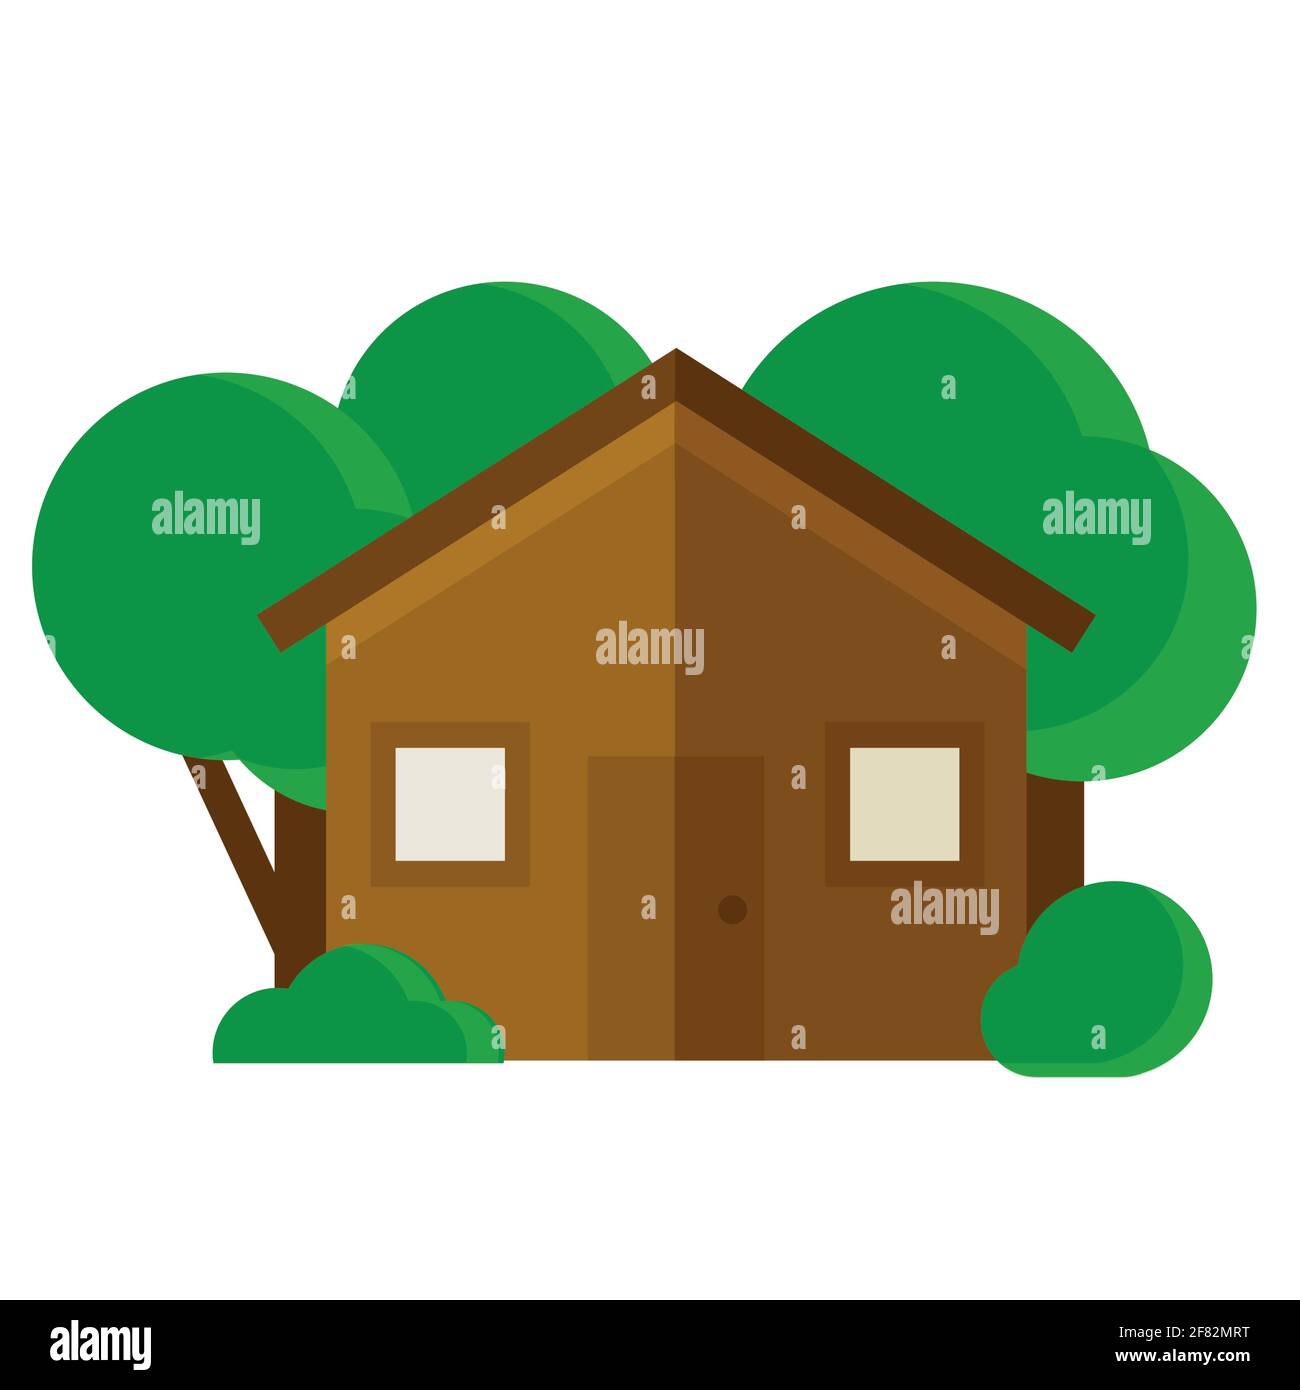 Farmhouse with green trees icon flat design Stock Vector